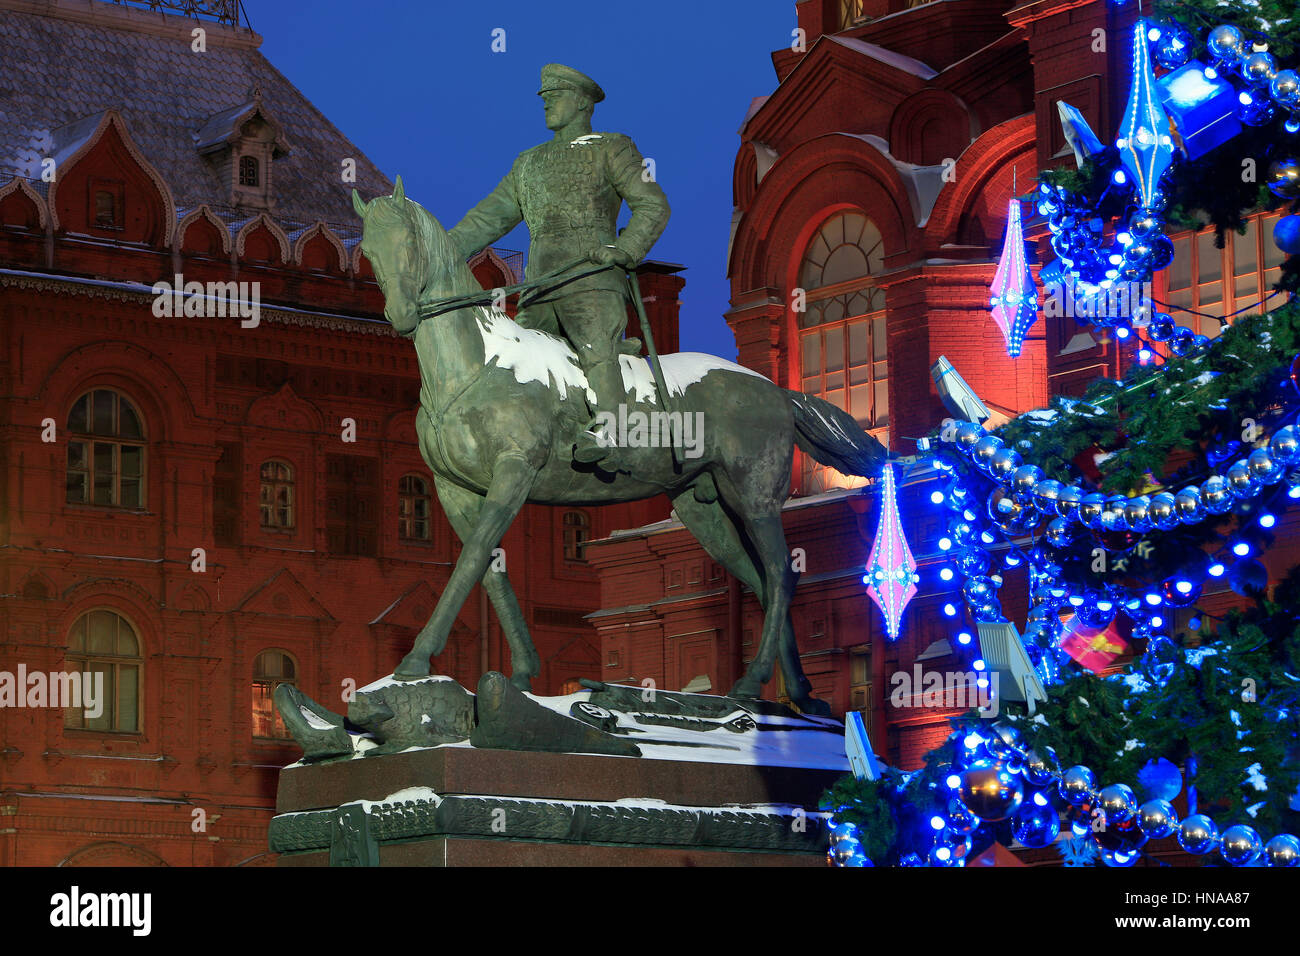 Monument to World War II Soviet Marshal Georgy Zhukov (1896-1974) at Manege Square during Christmas time in Moscow, Russia Stock Photo